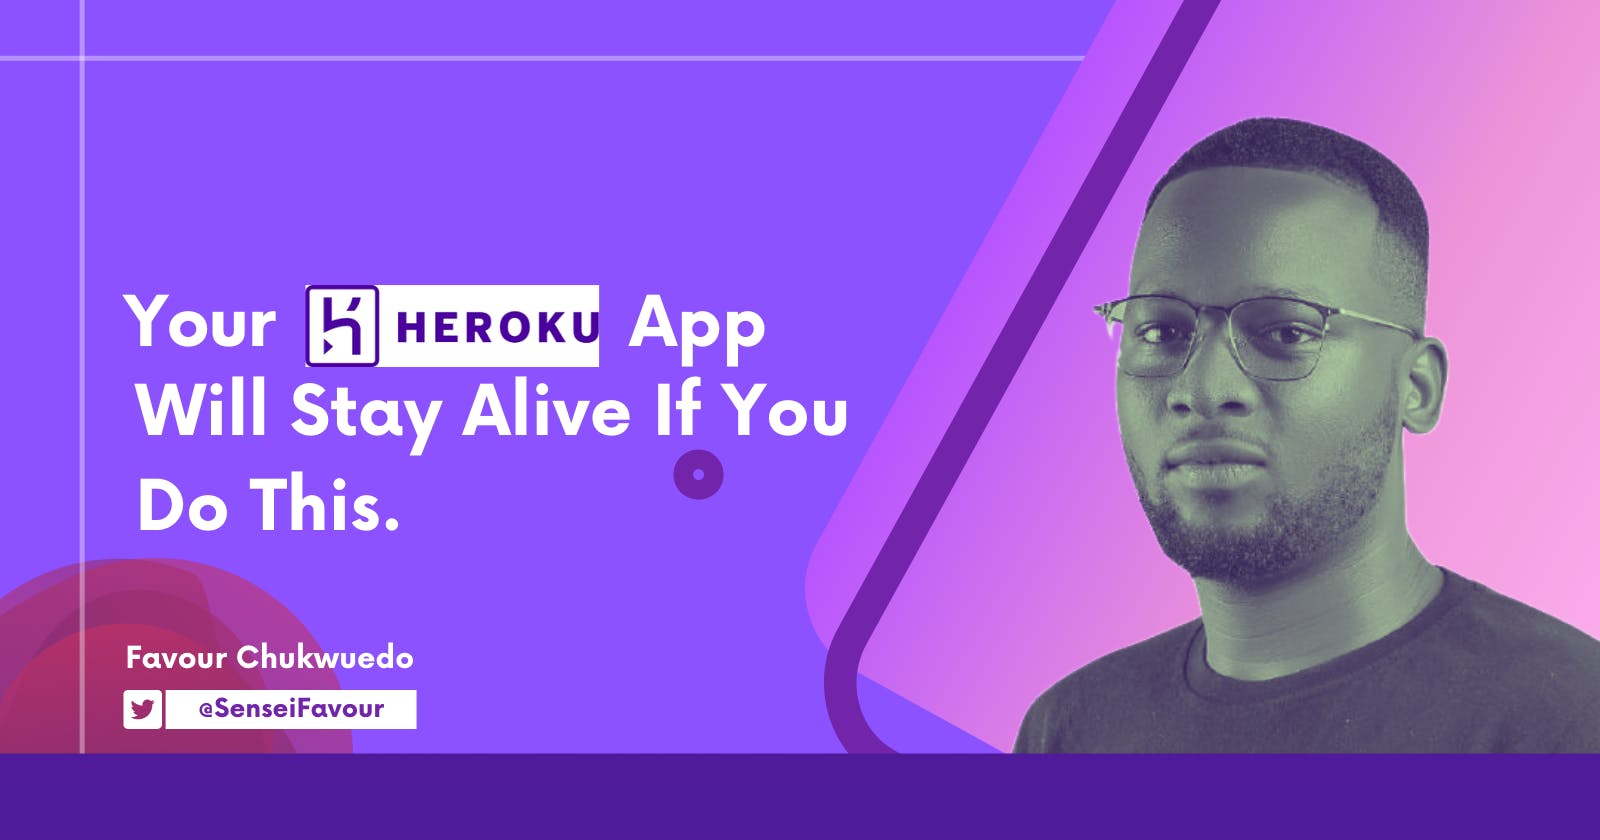 Your Heroku App Will Stay Alive If You Do This